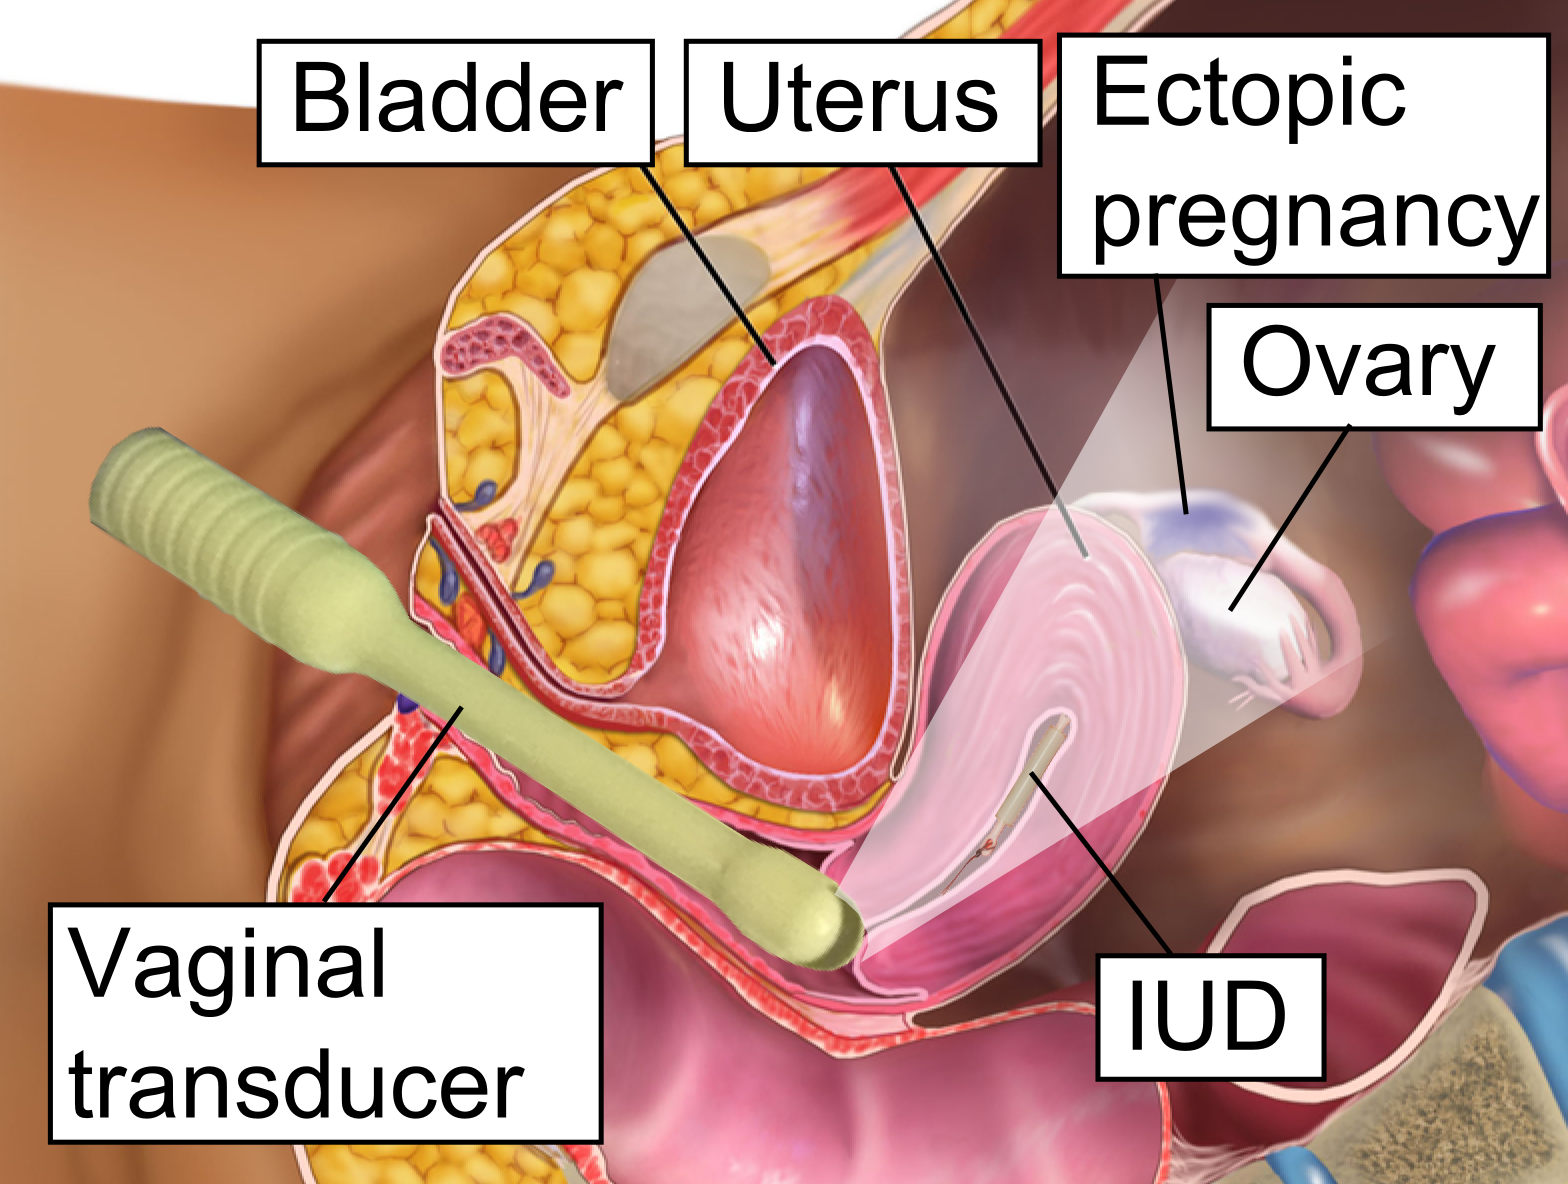 vaginal ultrasound in ectopic pregnancy